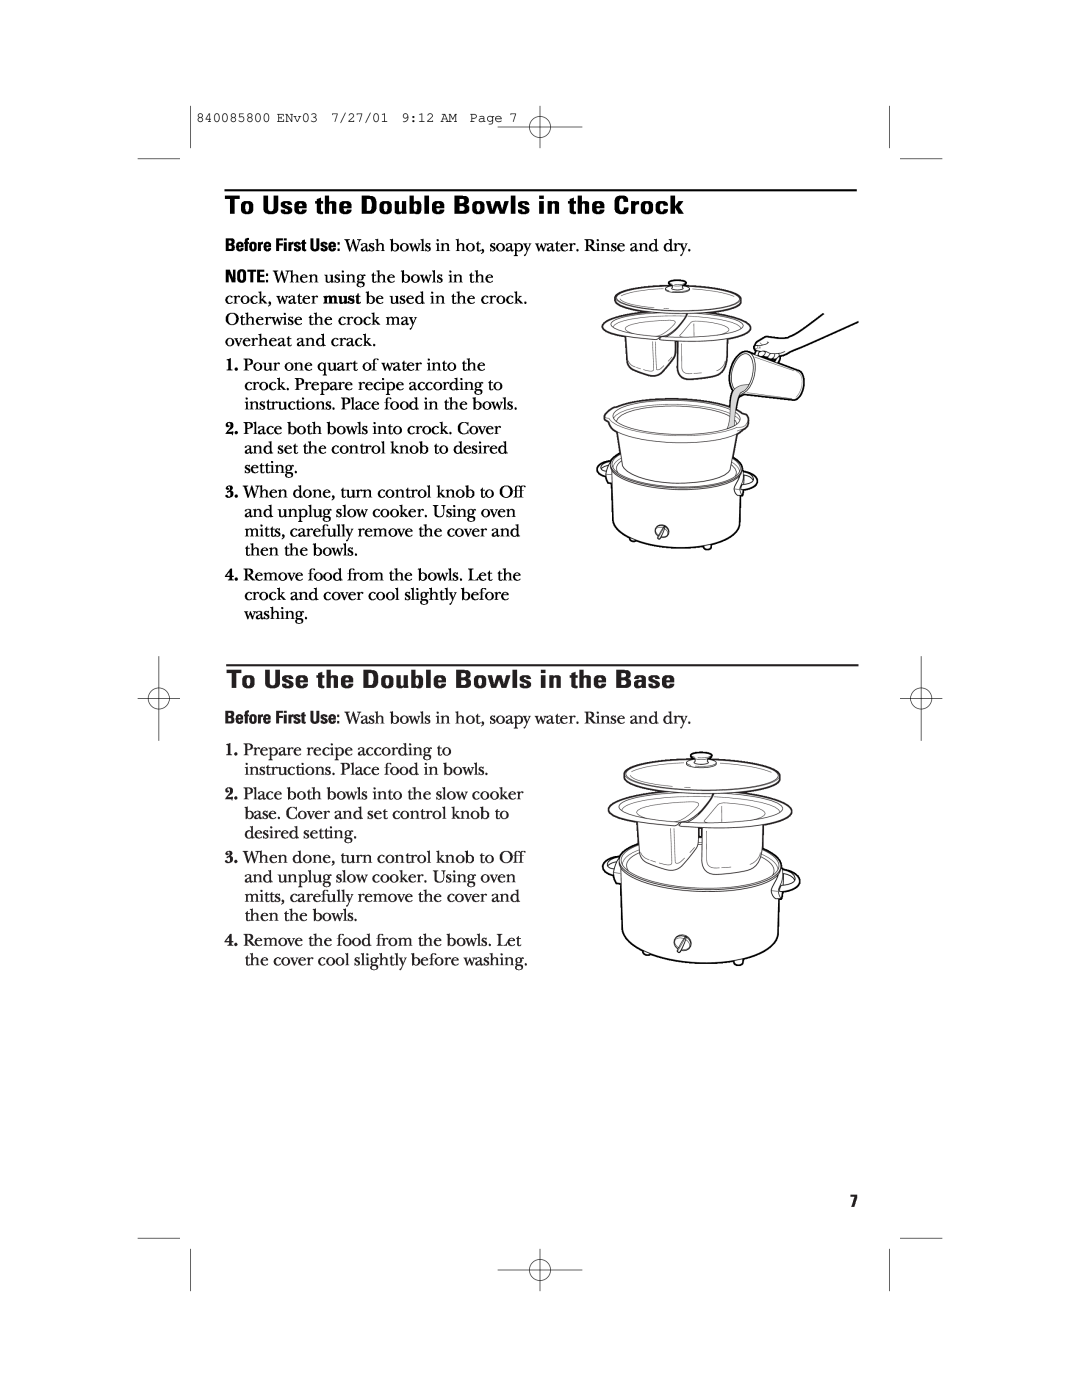 GE 840085800, 106851 manual To Use the Double Bowls in the Crock, To Use the Double Bowls in the Base 